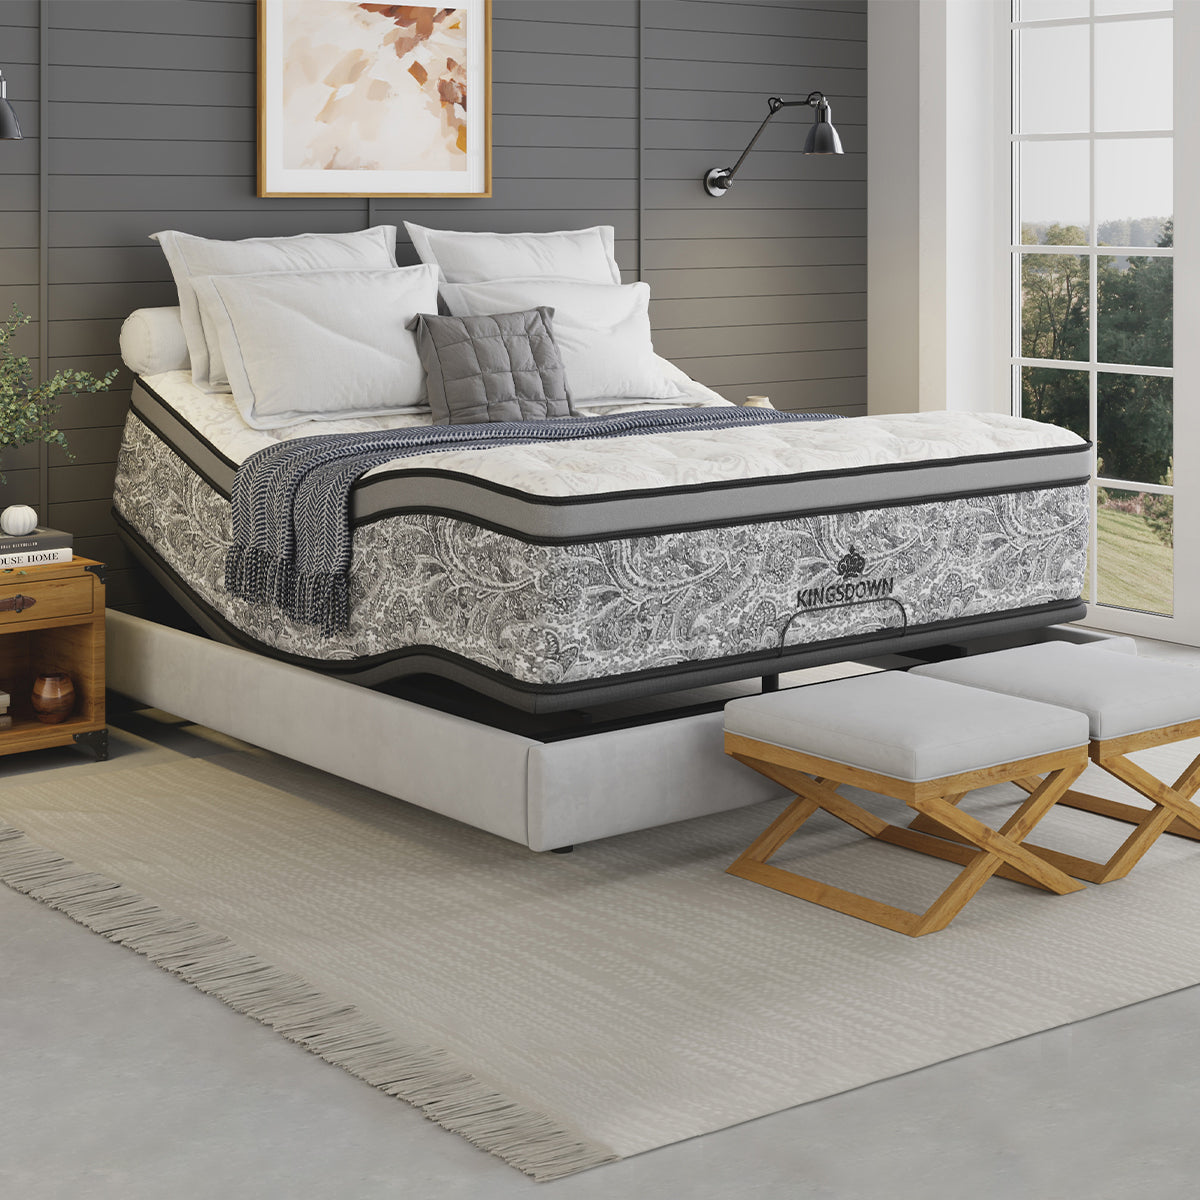 Picture of Kingsdown Wilcrest Hybrid Eurotop Mattress